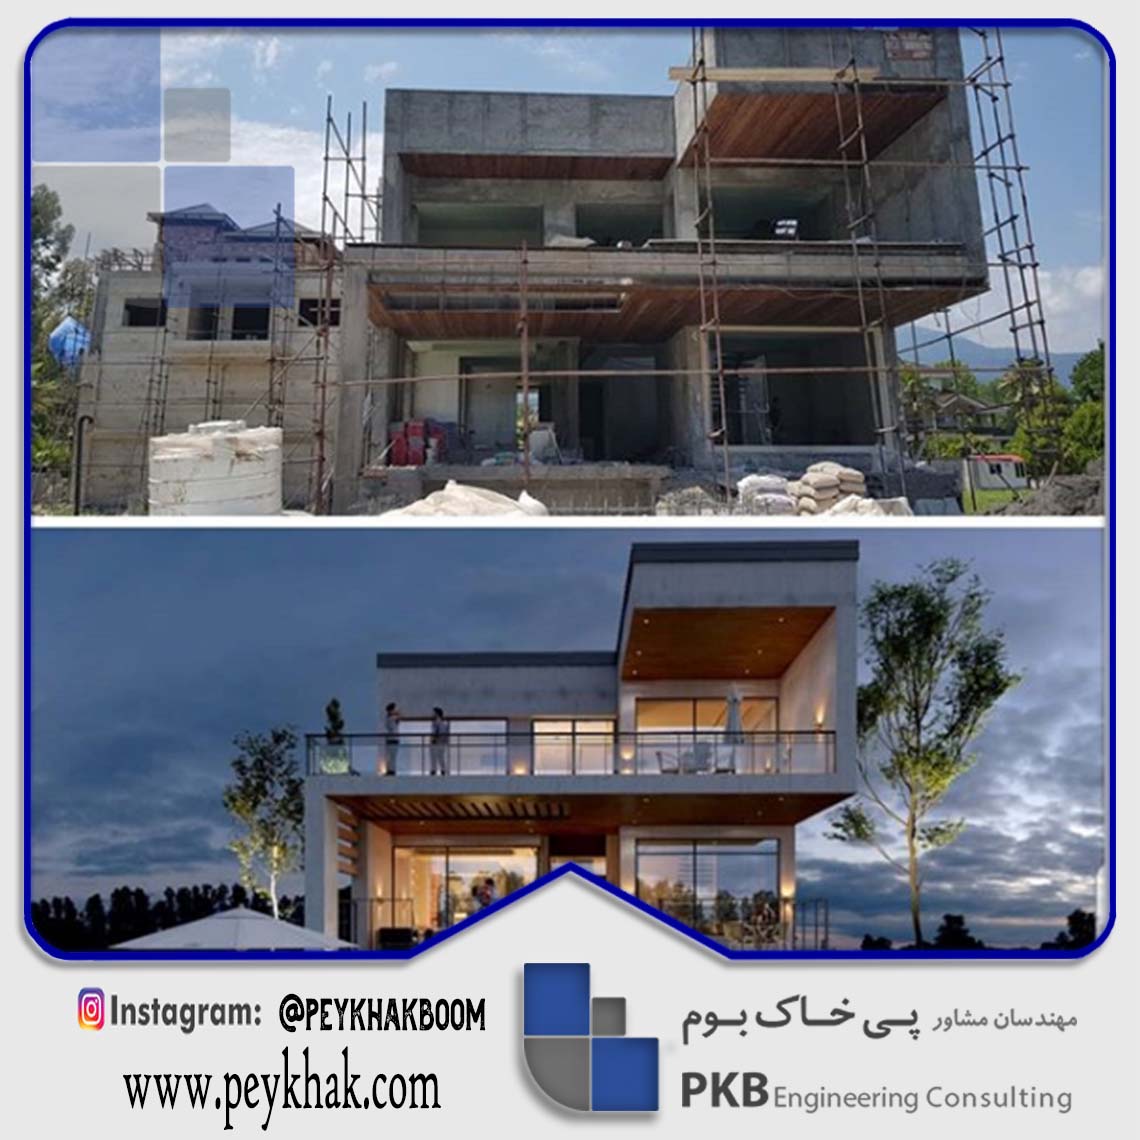 Visiting the project under construction of the private villa of Engineer Mehdi Najafi